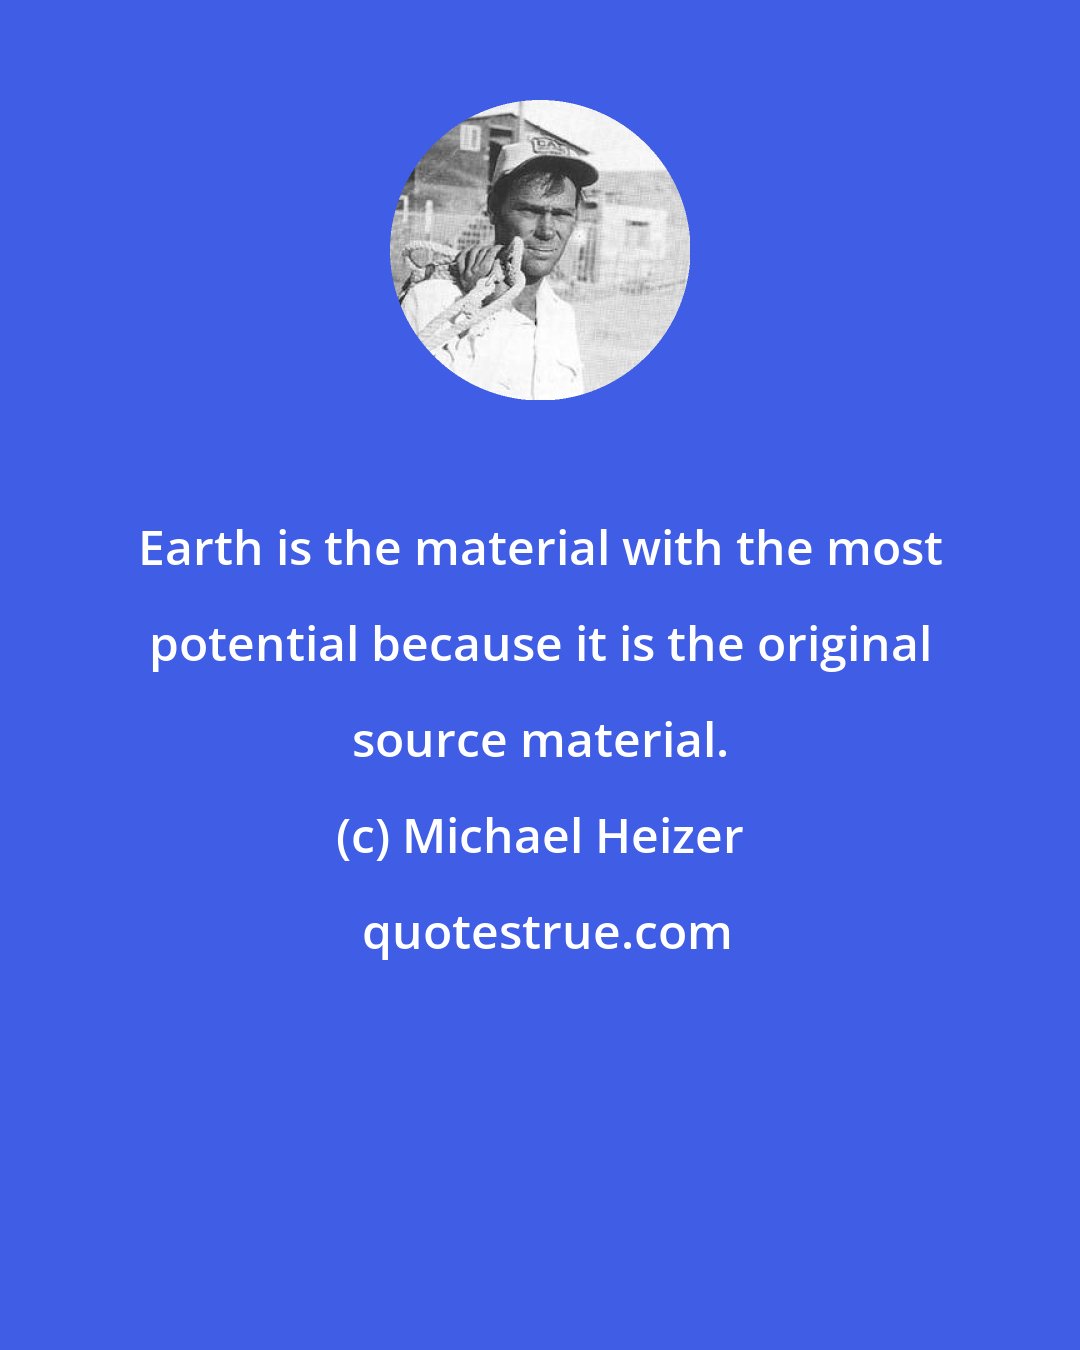 Michael Heizer: Earth is the material with the most potential because it is the original source material.